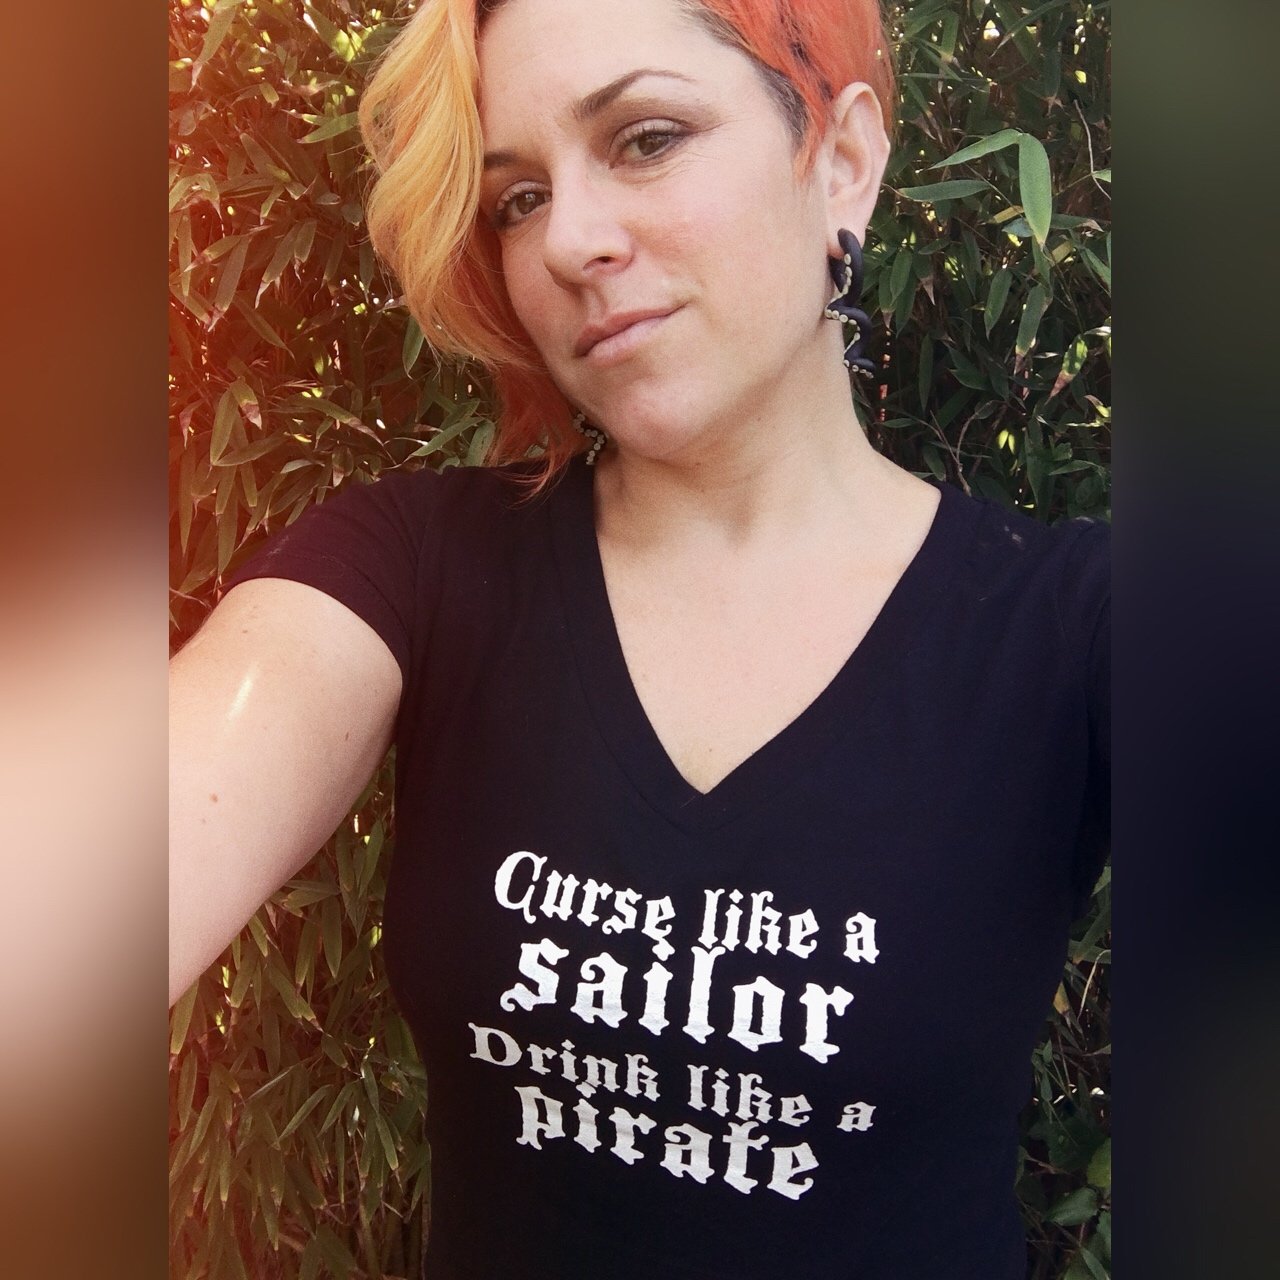 Orange haired woman in v-neck black t-shirt that says "Curse like a sailor drink like a pirate"